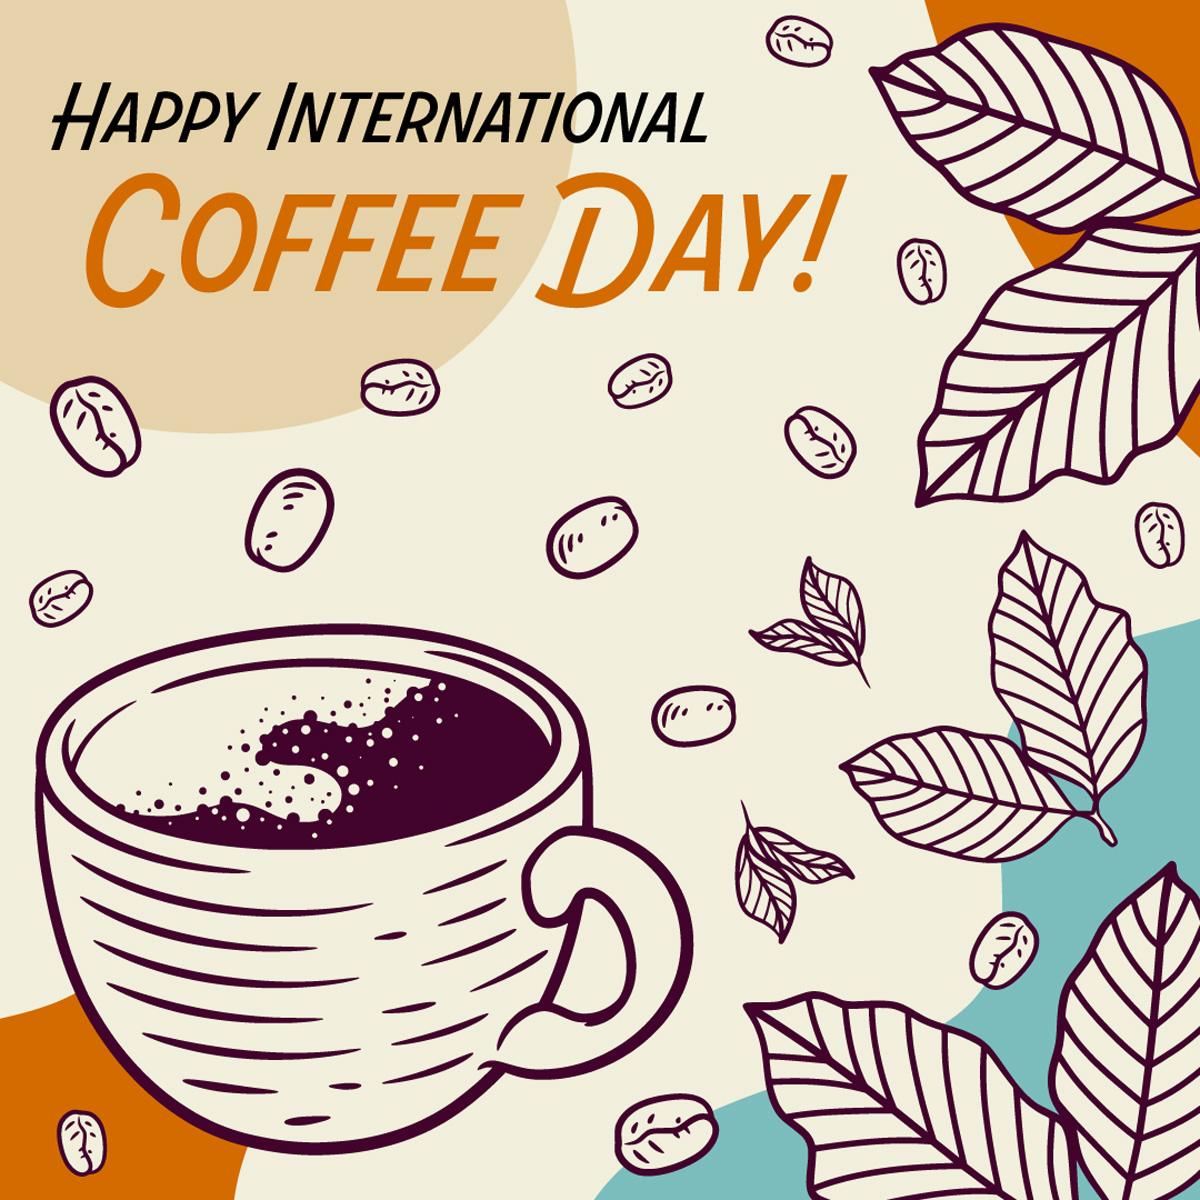 Happy International Coffee Day! Just like you can customize your favorite coffee order, we can customize the right loan option for you. Comment with your order below! #coffeeday #internationalcoffeeday #homeloan #mortgageloan #realestate #dallasrealestate #houstonrealestate